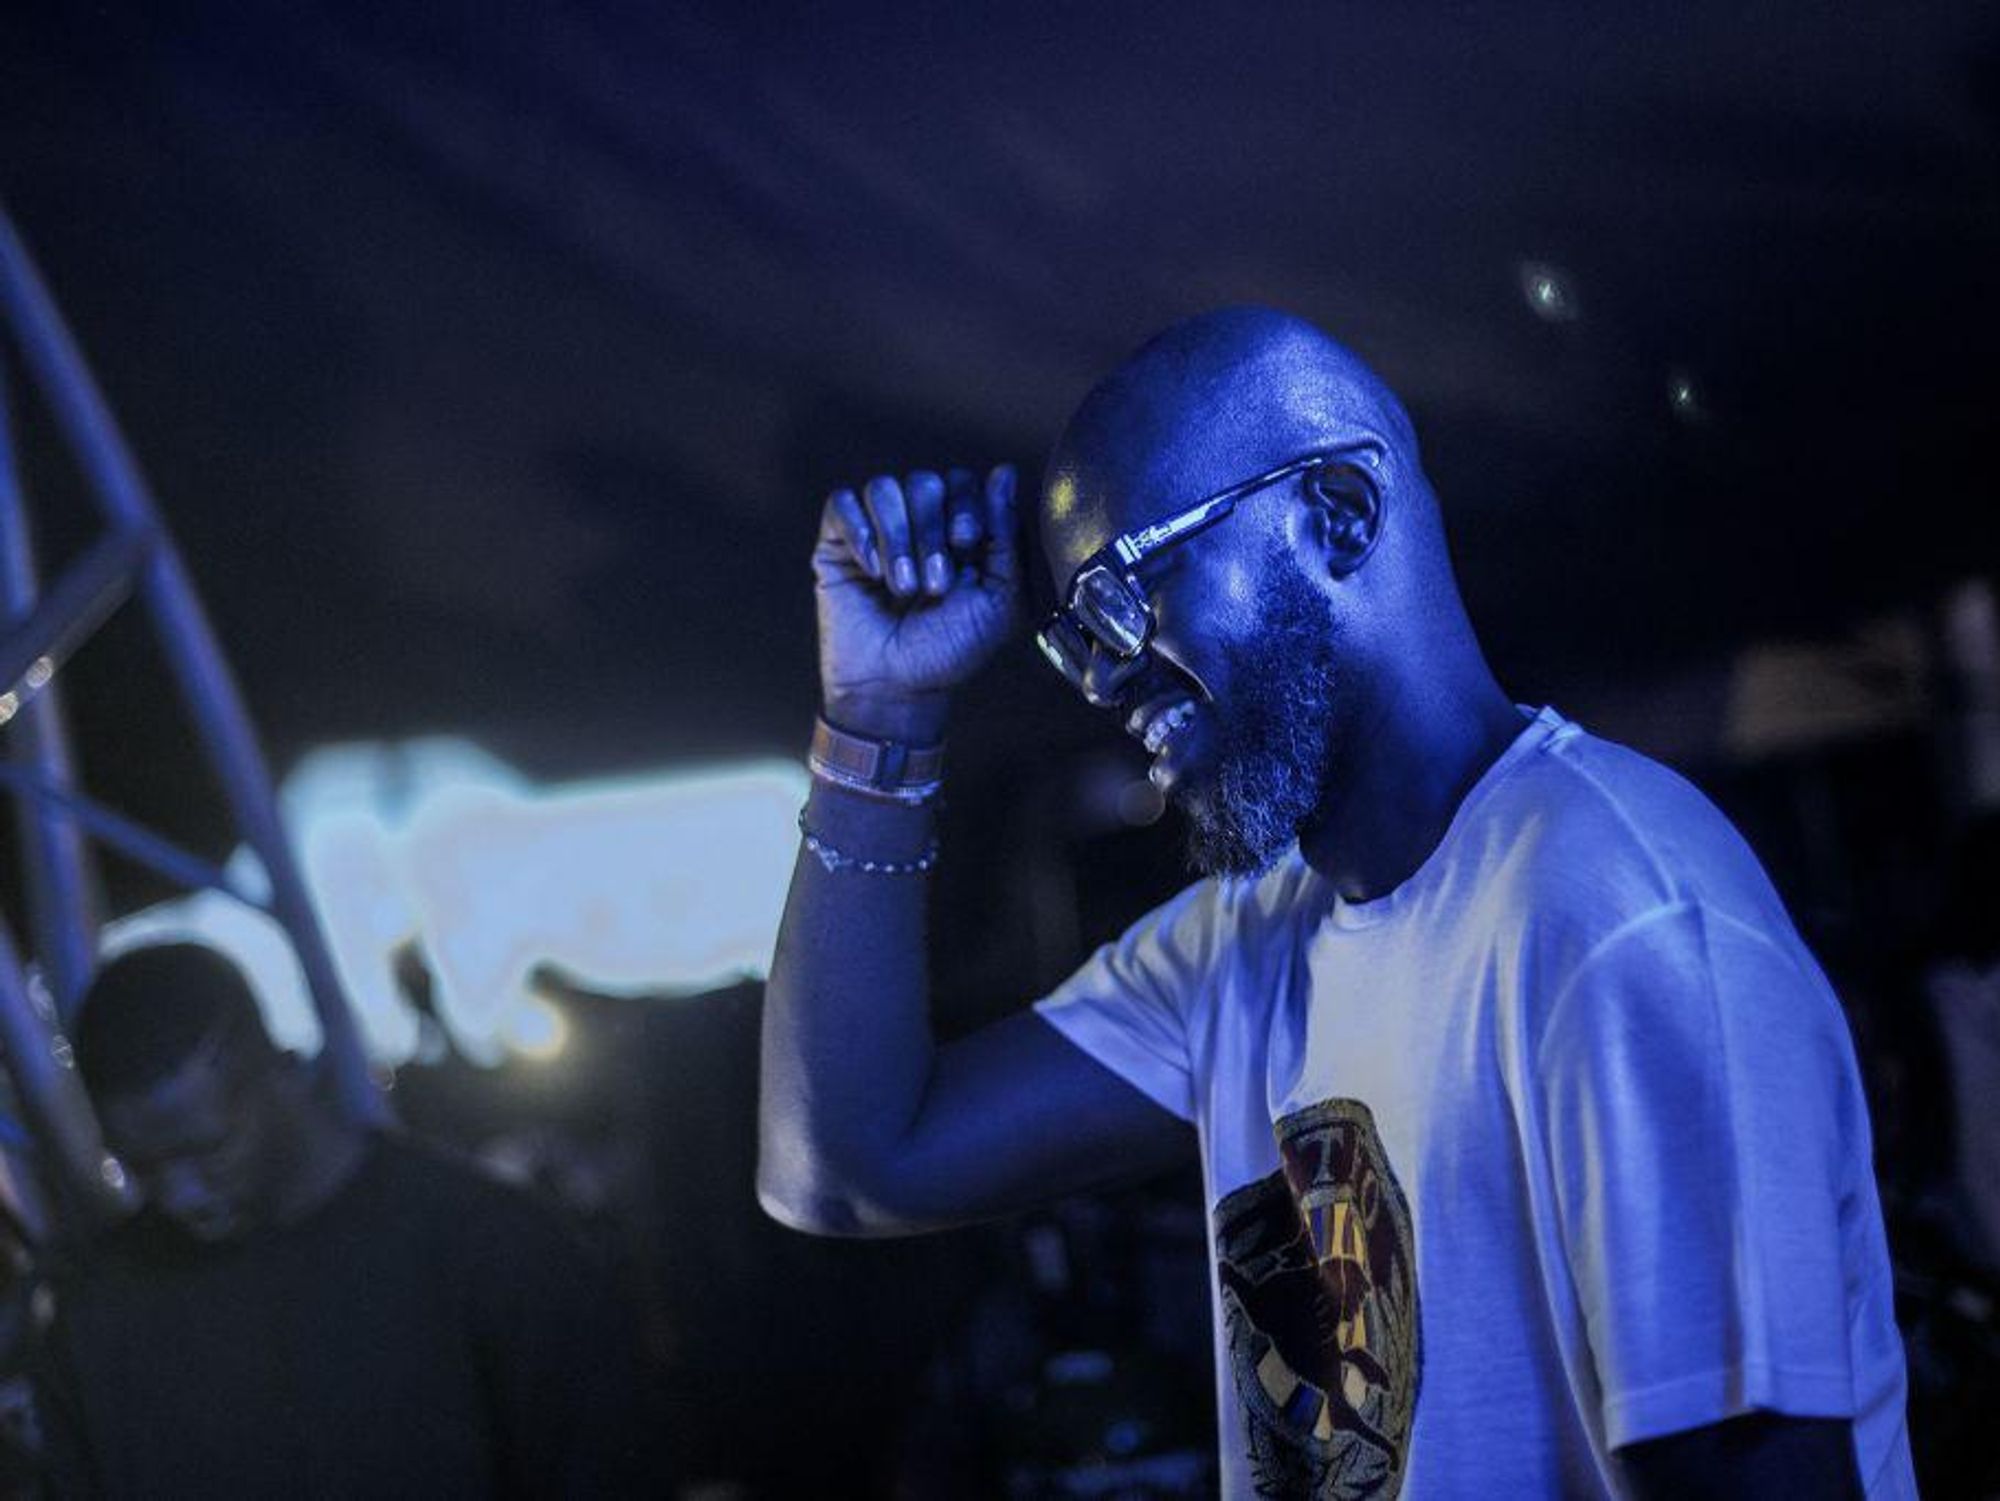 Black Coffee, Sampa the Great, and More African Acts To Perform at Coachella 2022